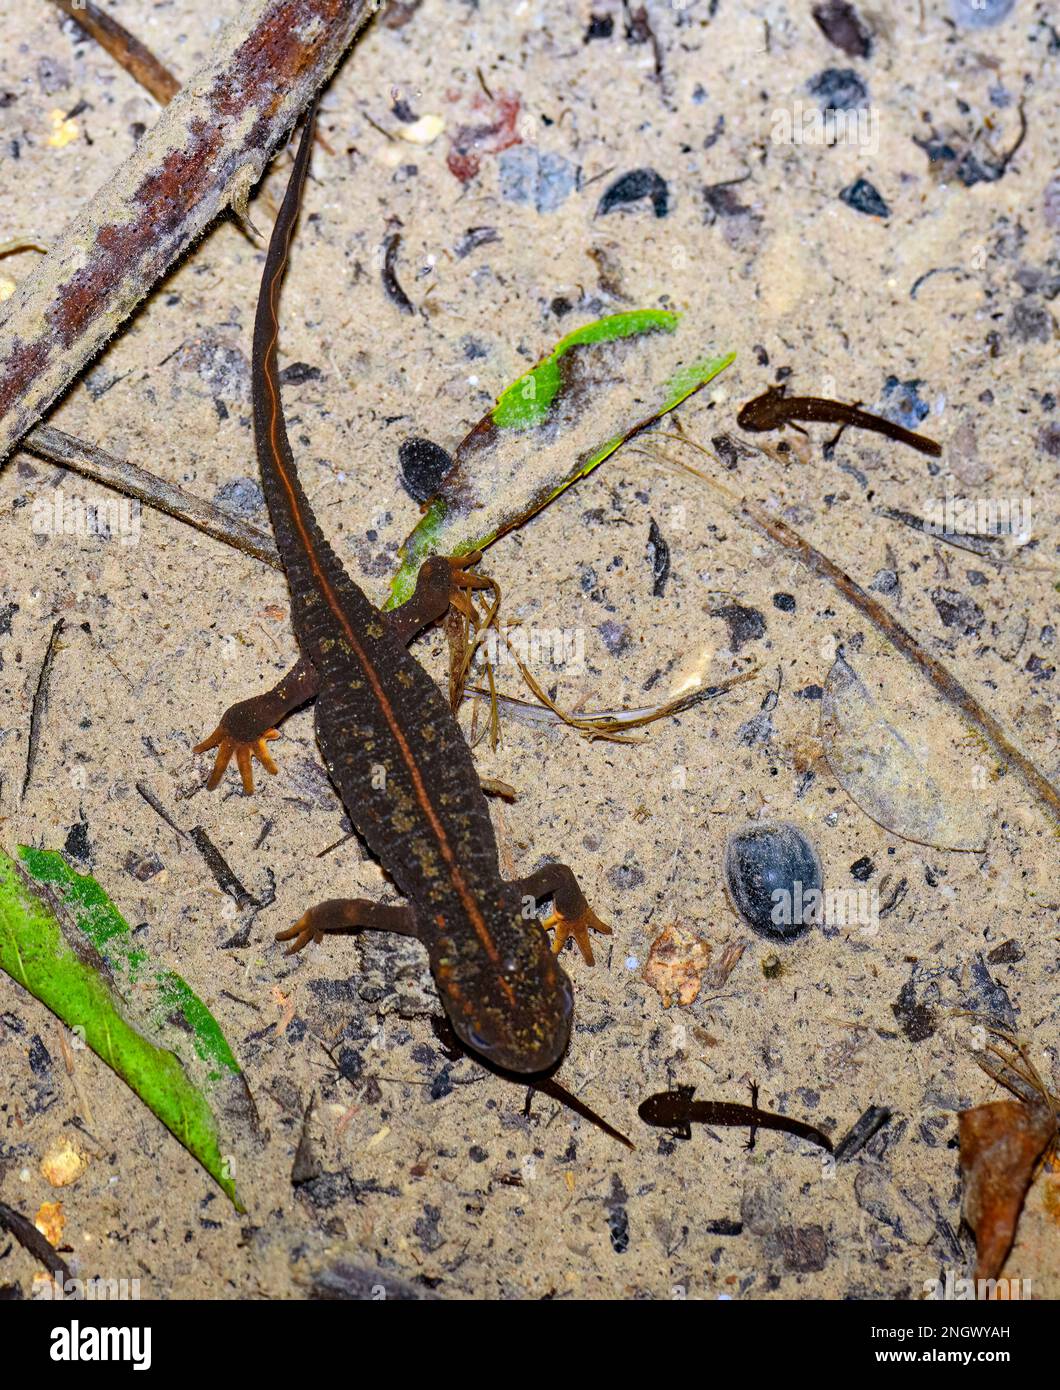 Sword-tailed newt (Cynops ensicauda) from Amami Oshima, Japan. Do note the three juvenile salamanders in the photo. Stock Photo